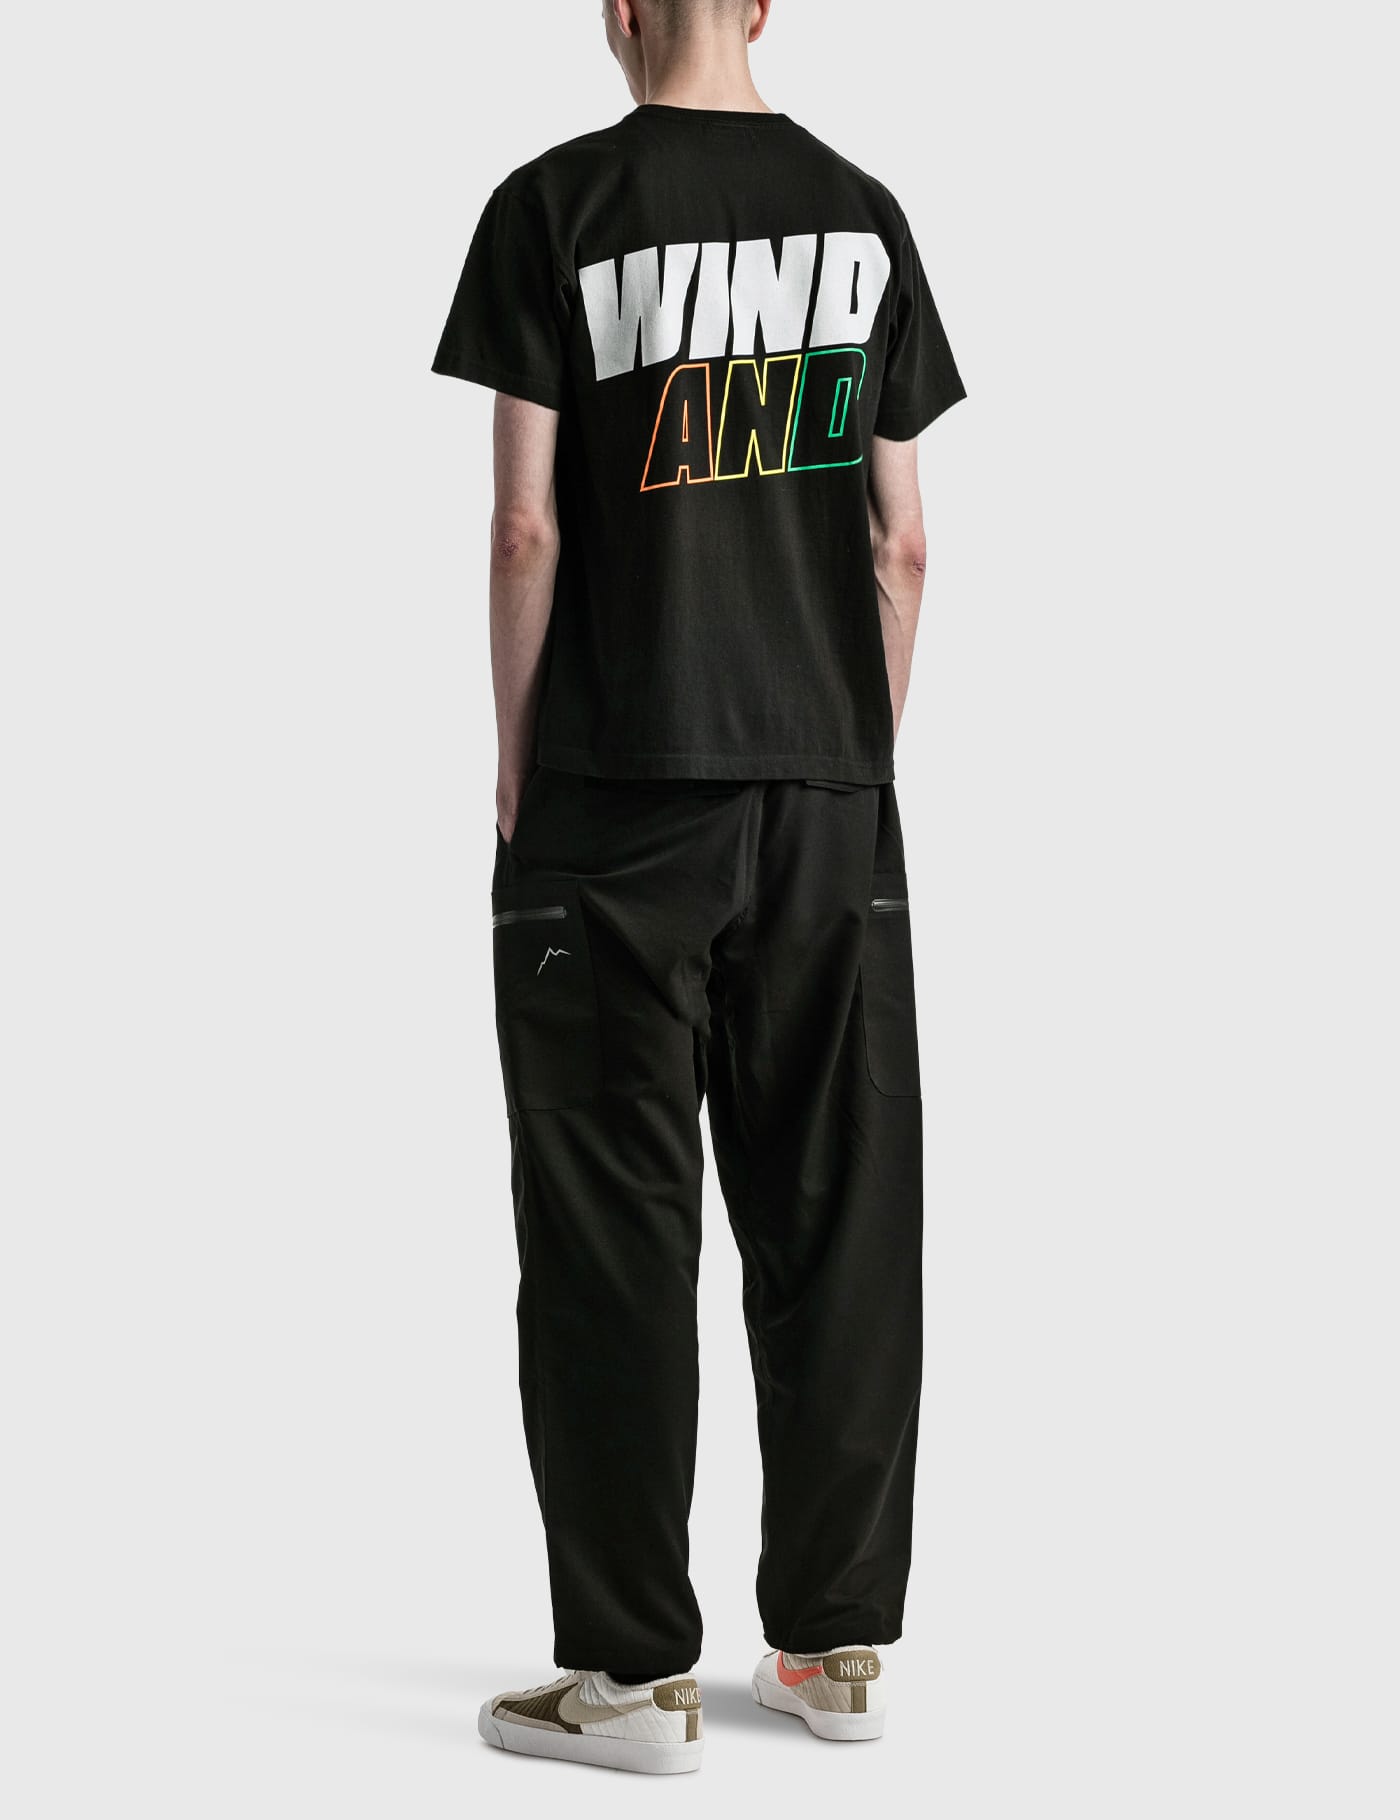 Wind And Sea - Sea Alive T-shirt | HBX - Globally Curated Fashion